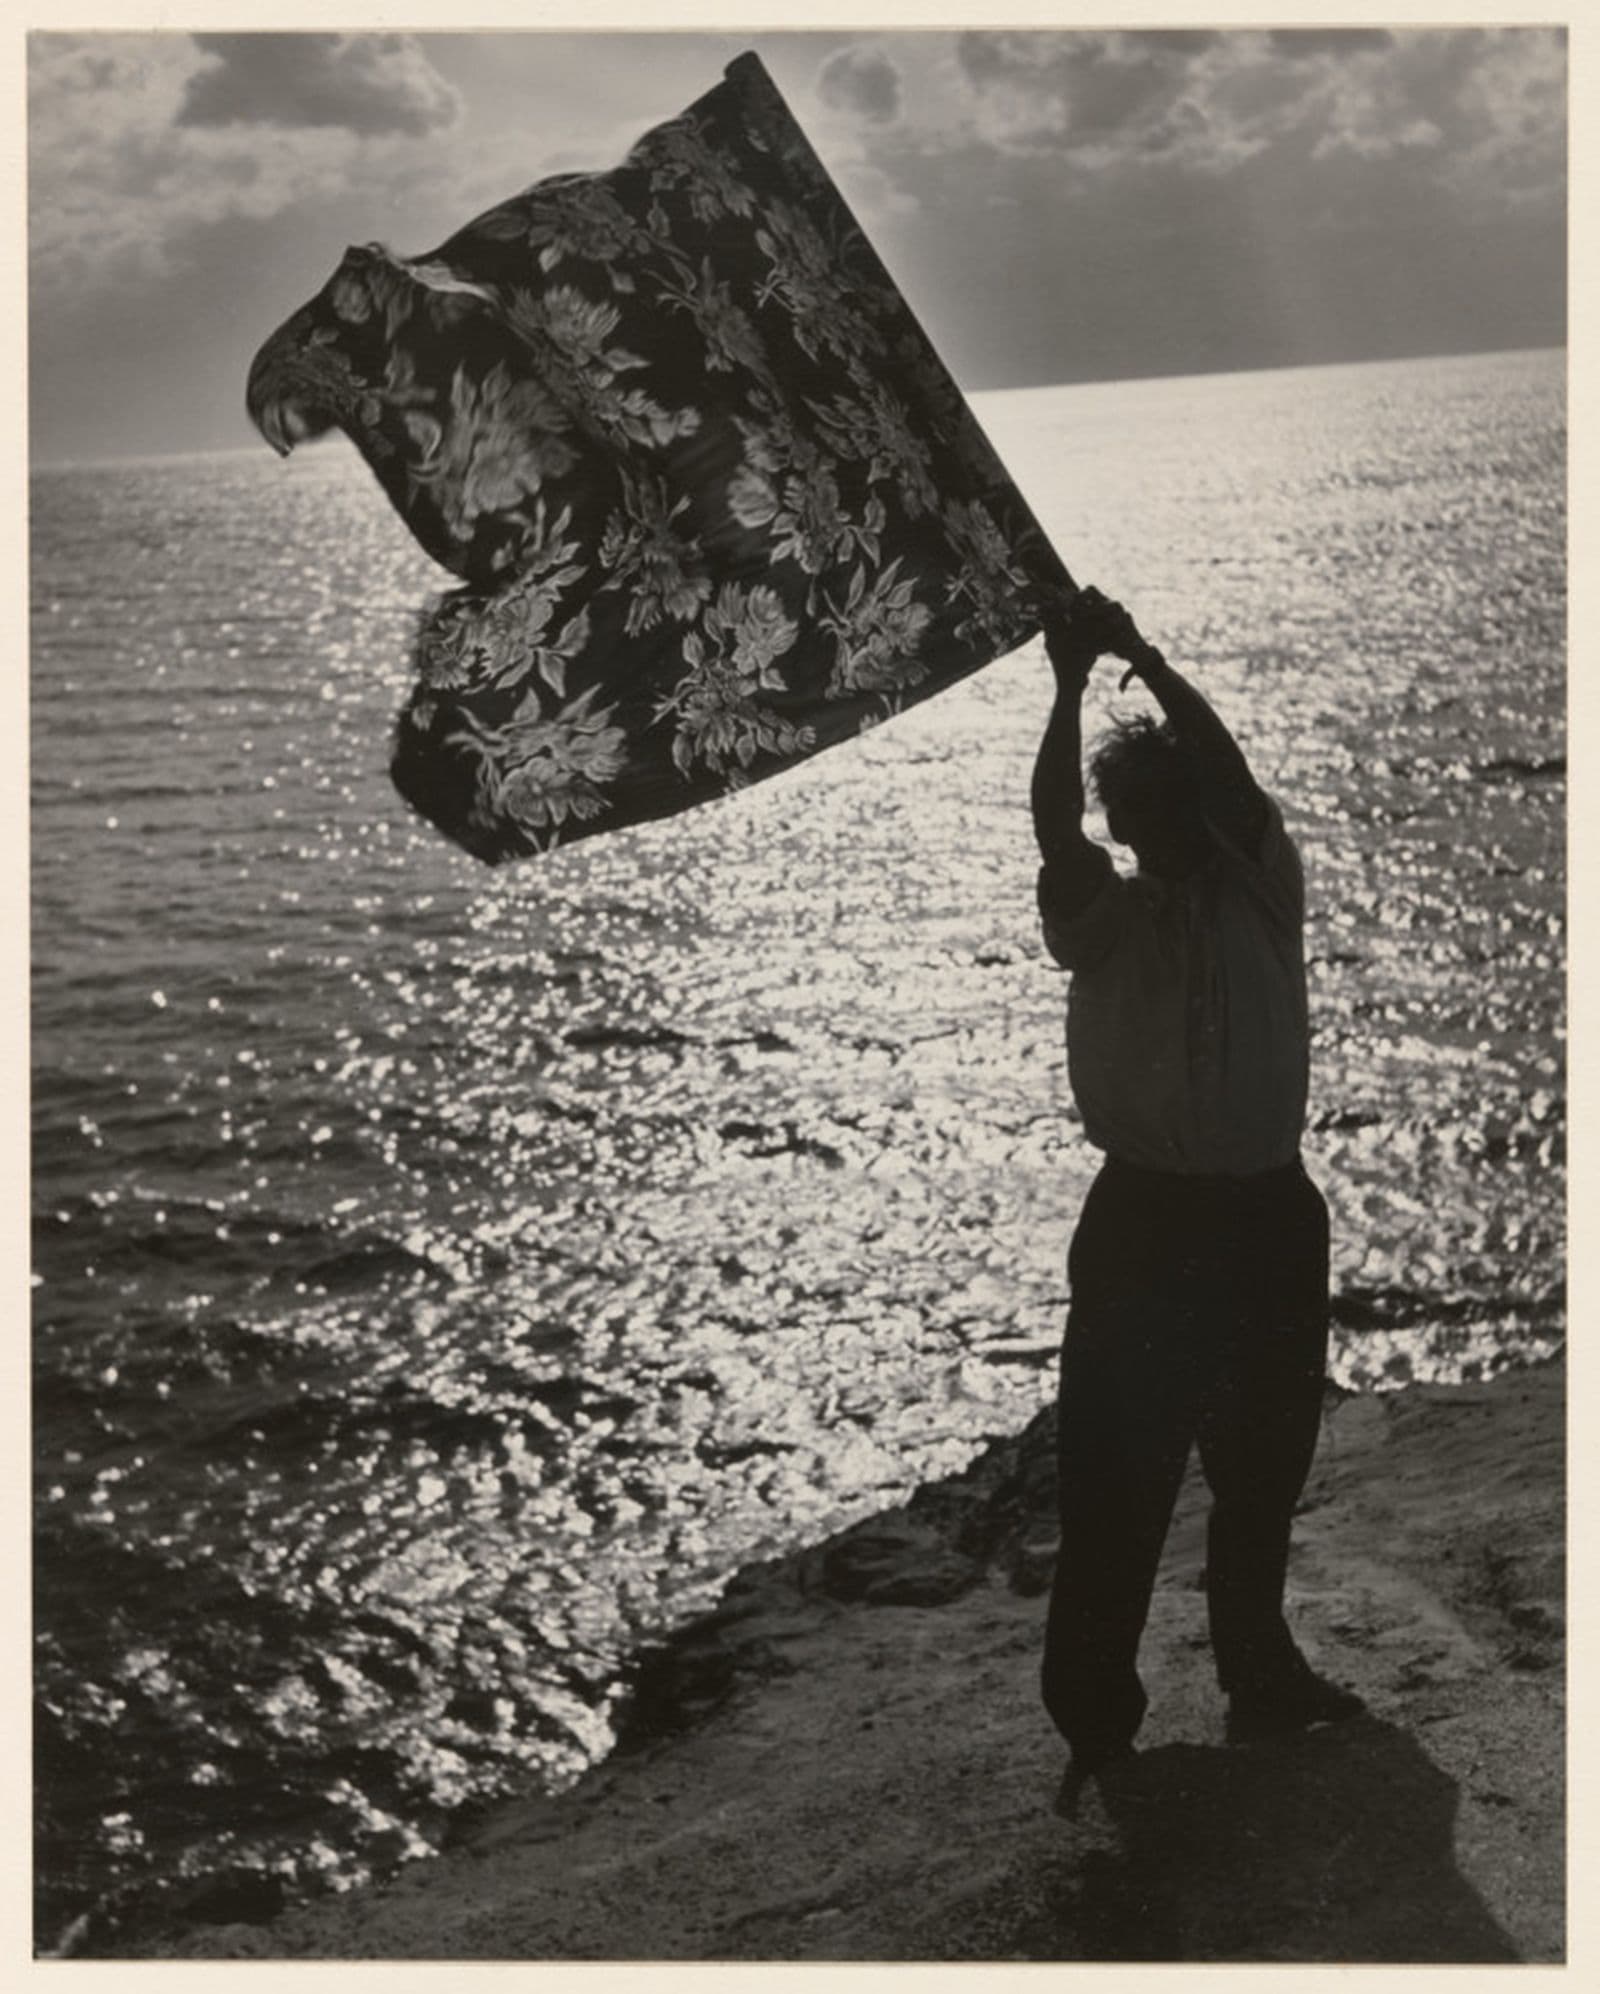 A black and white photograph of a figure standing at the edge of the cliff holding a piece of fabric that flutters in the wind